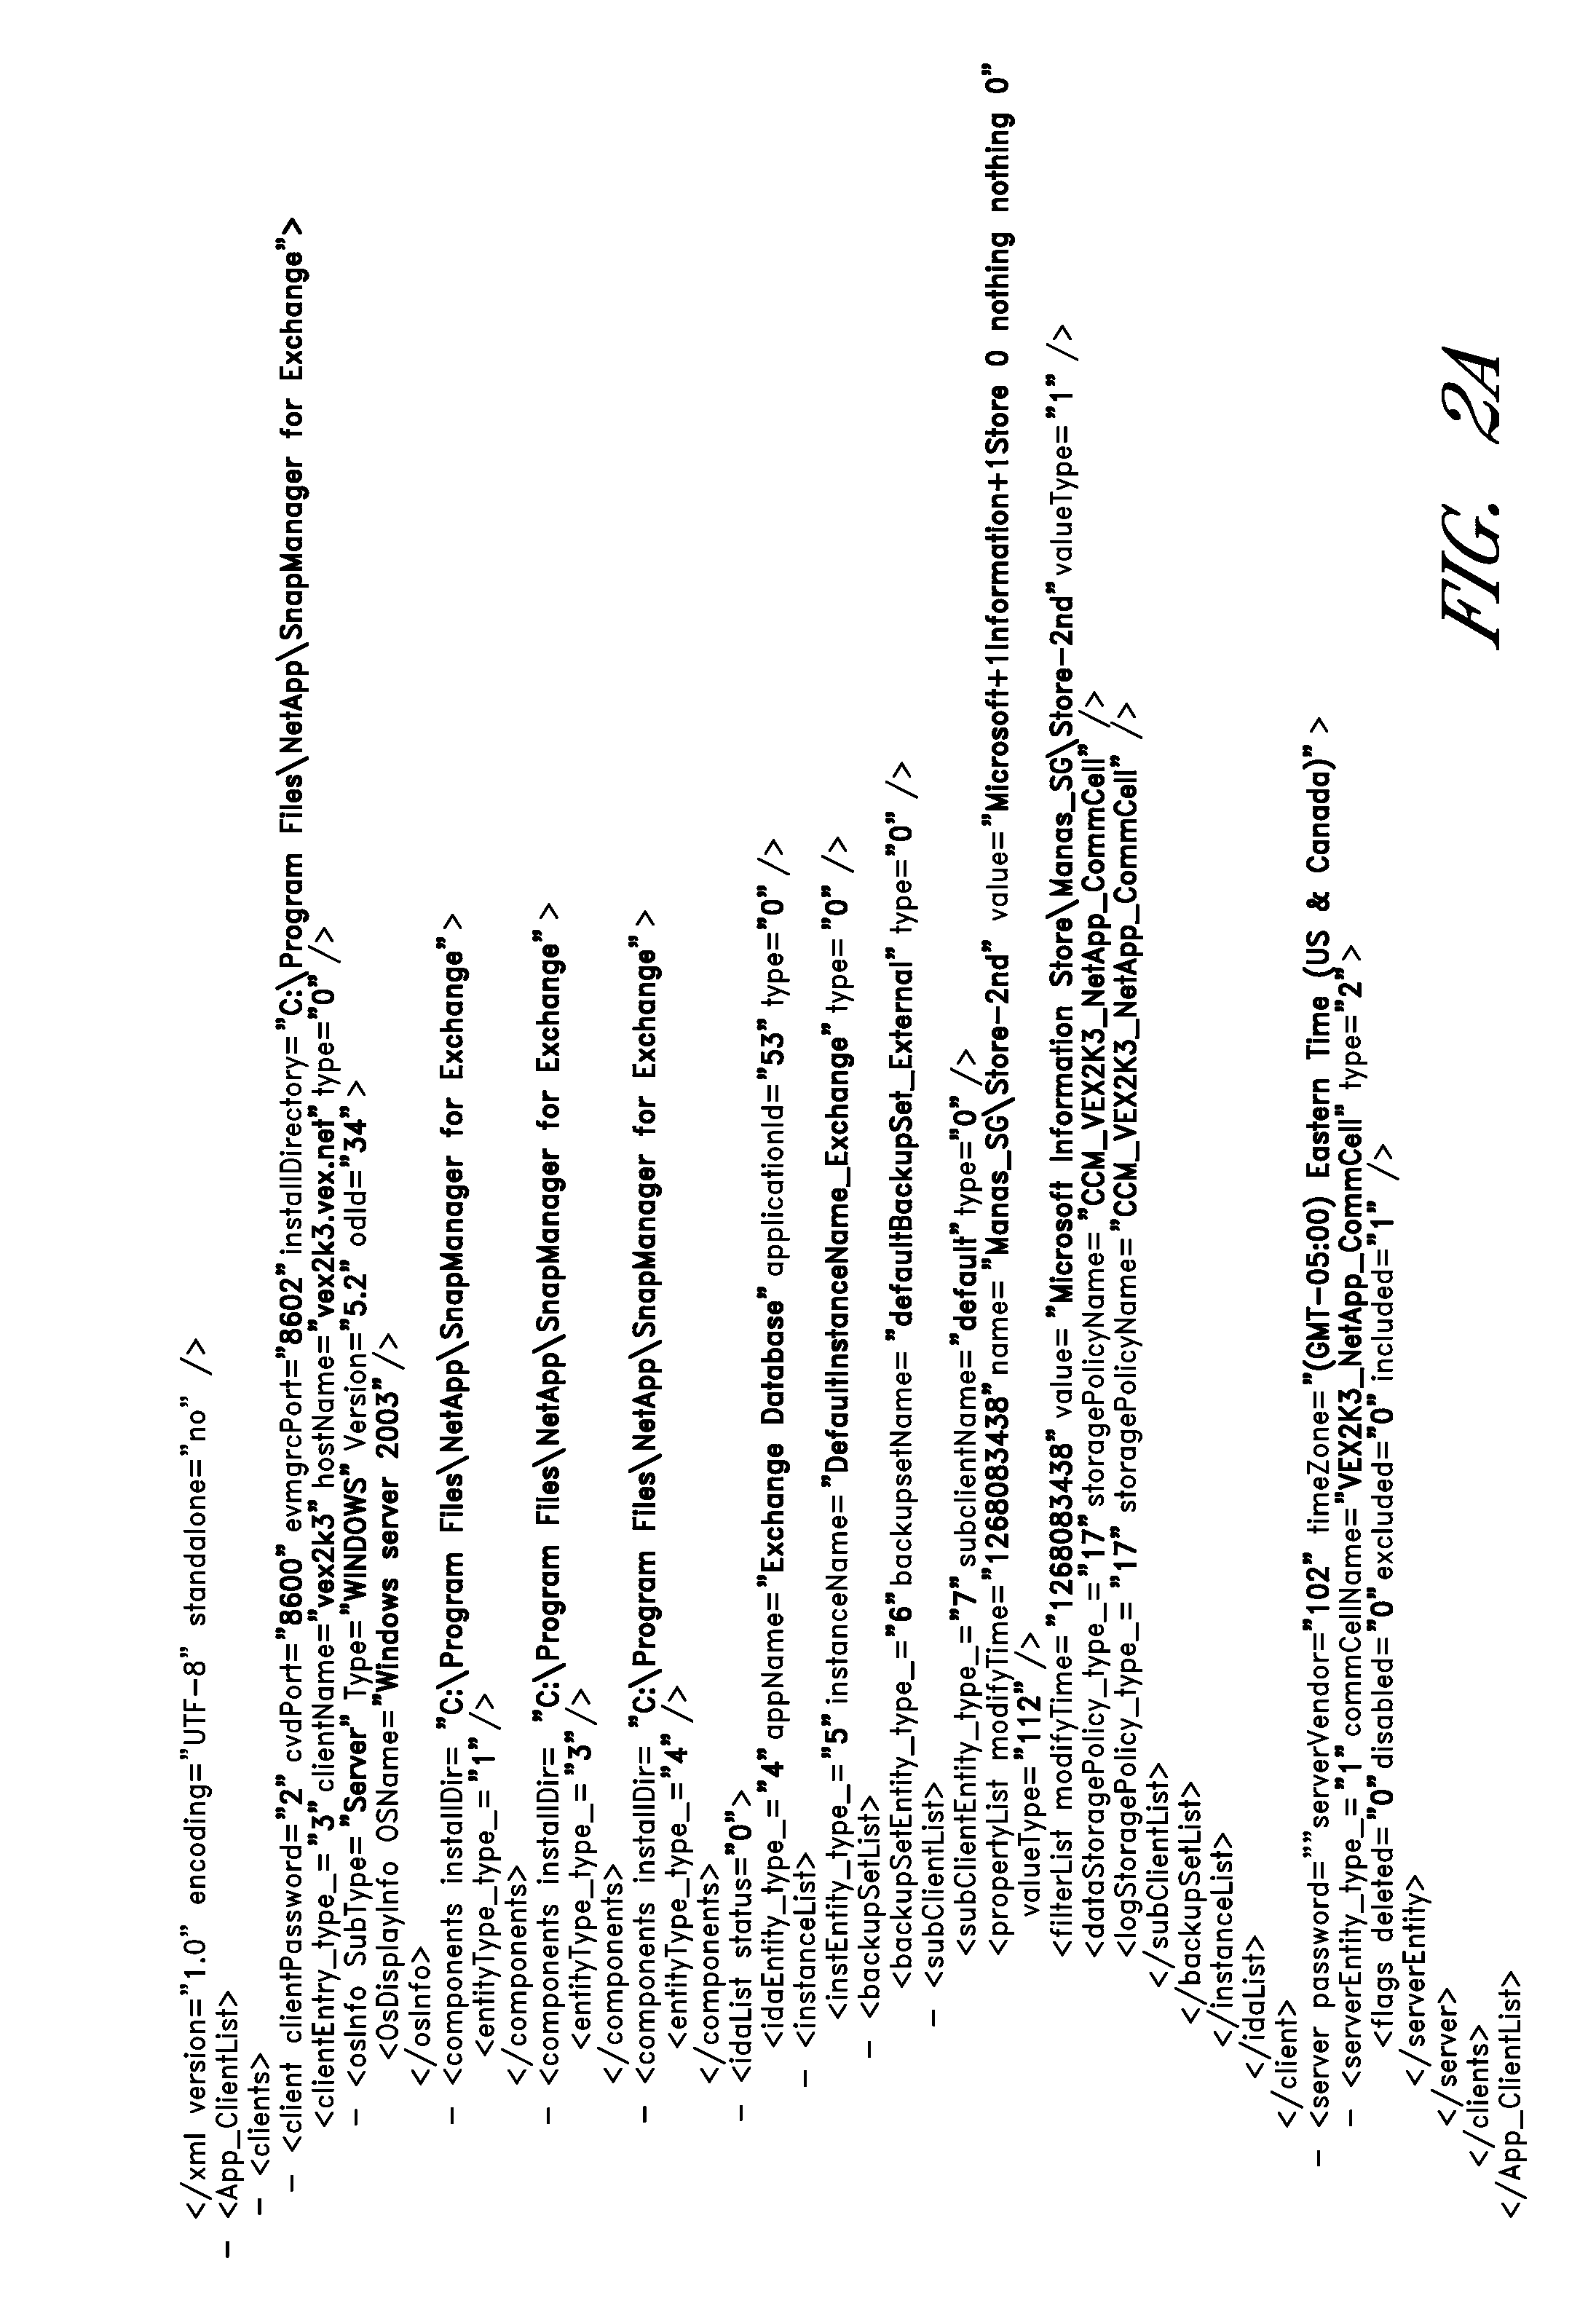 Information management systems and methods for heterogeneous data sources